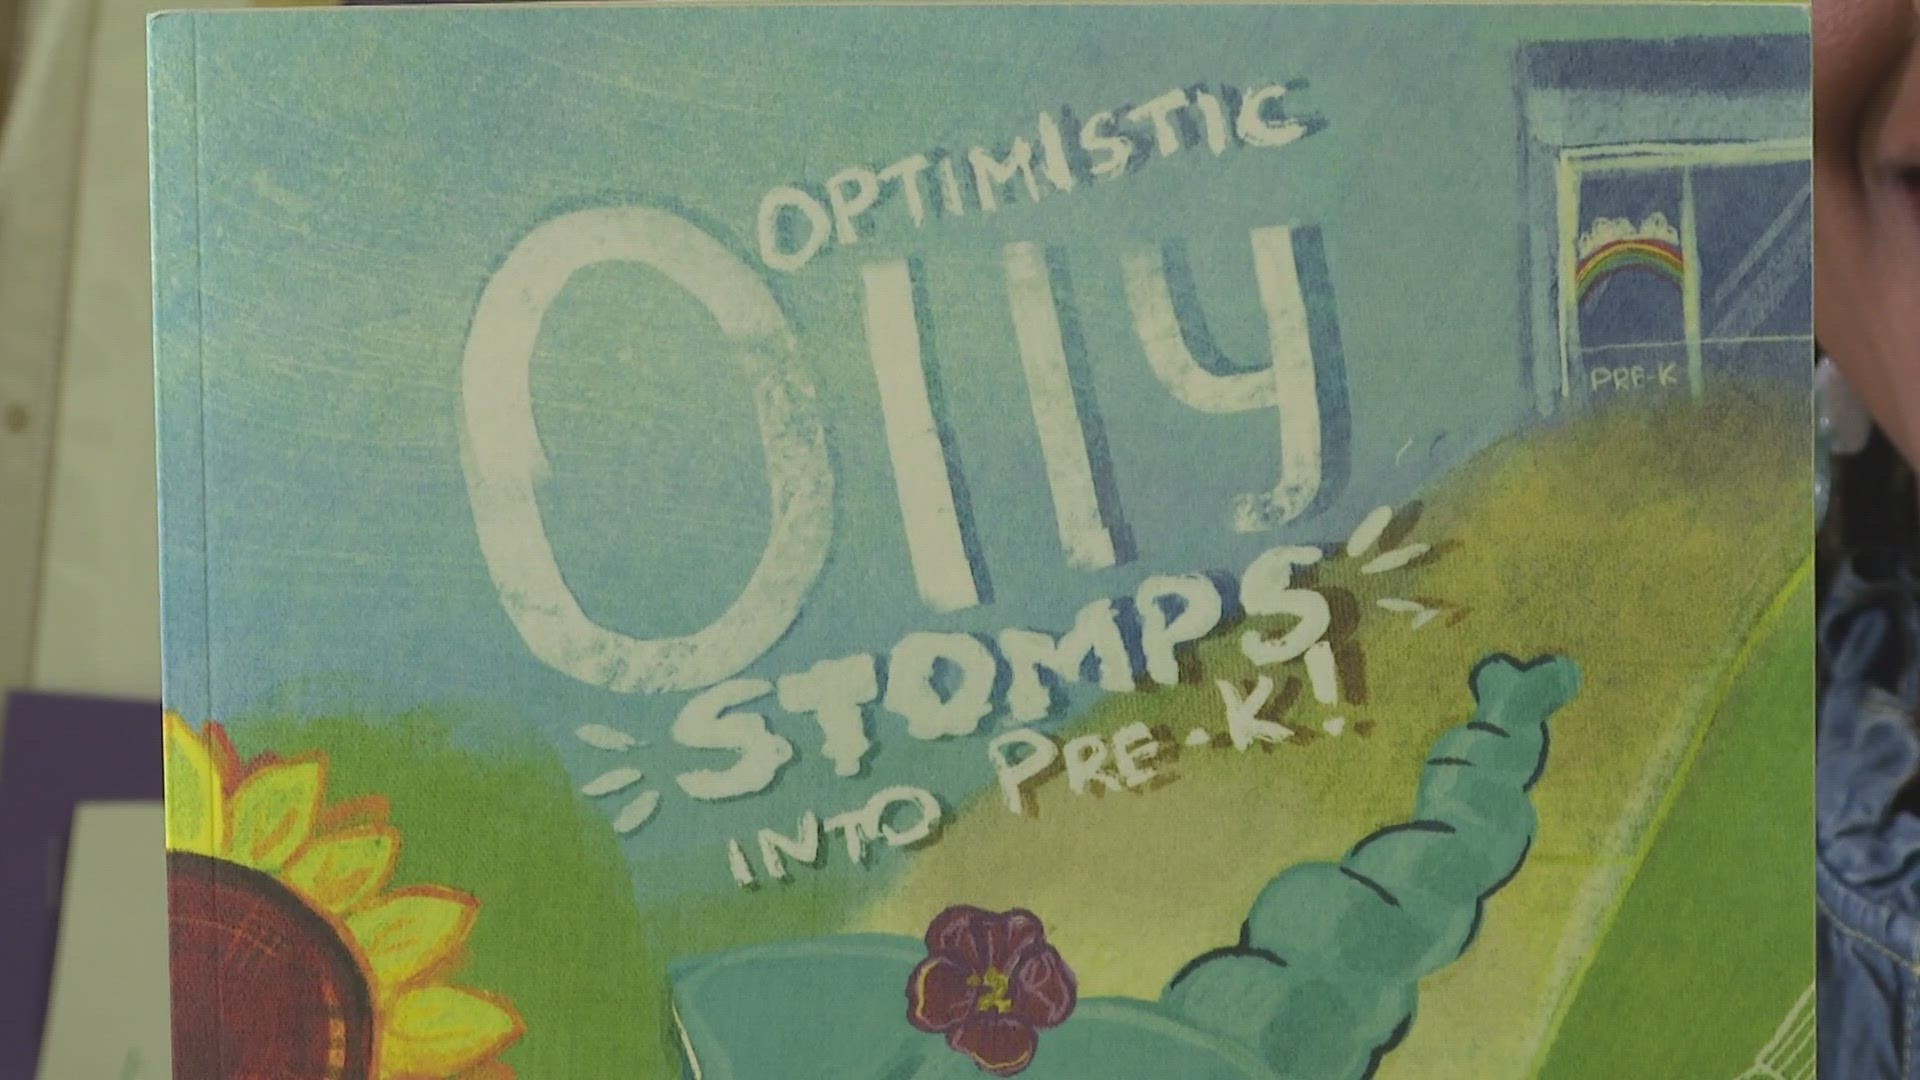 The Guilford County Schools teacher’s book “Optimistic Olly Stomps into Pre-K” is now for sale on Amazon and is in the Library of Congress.